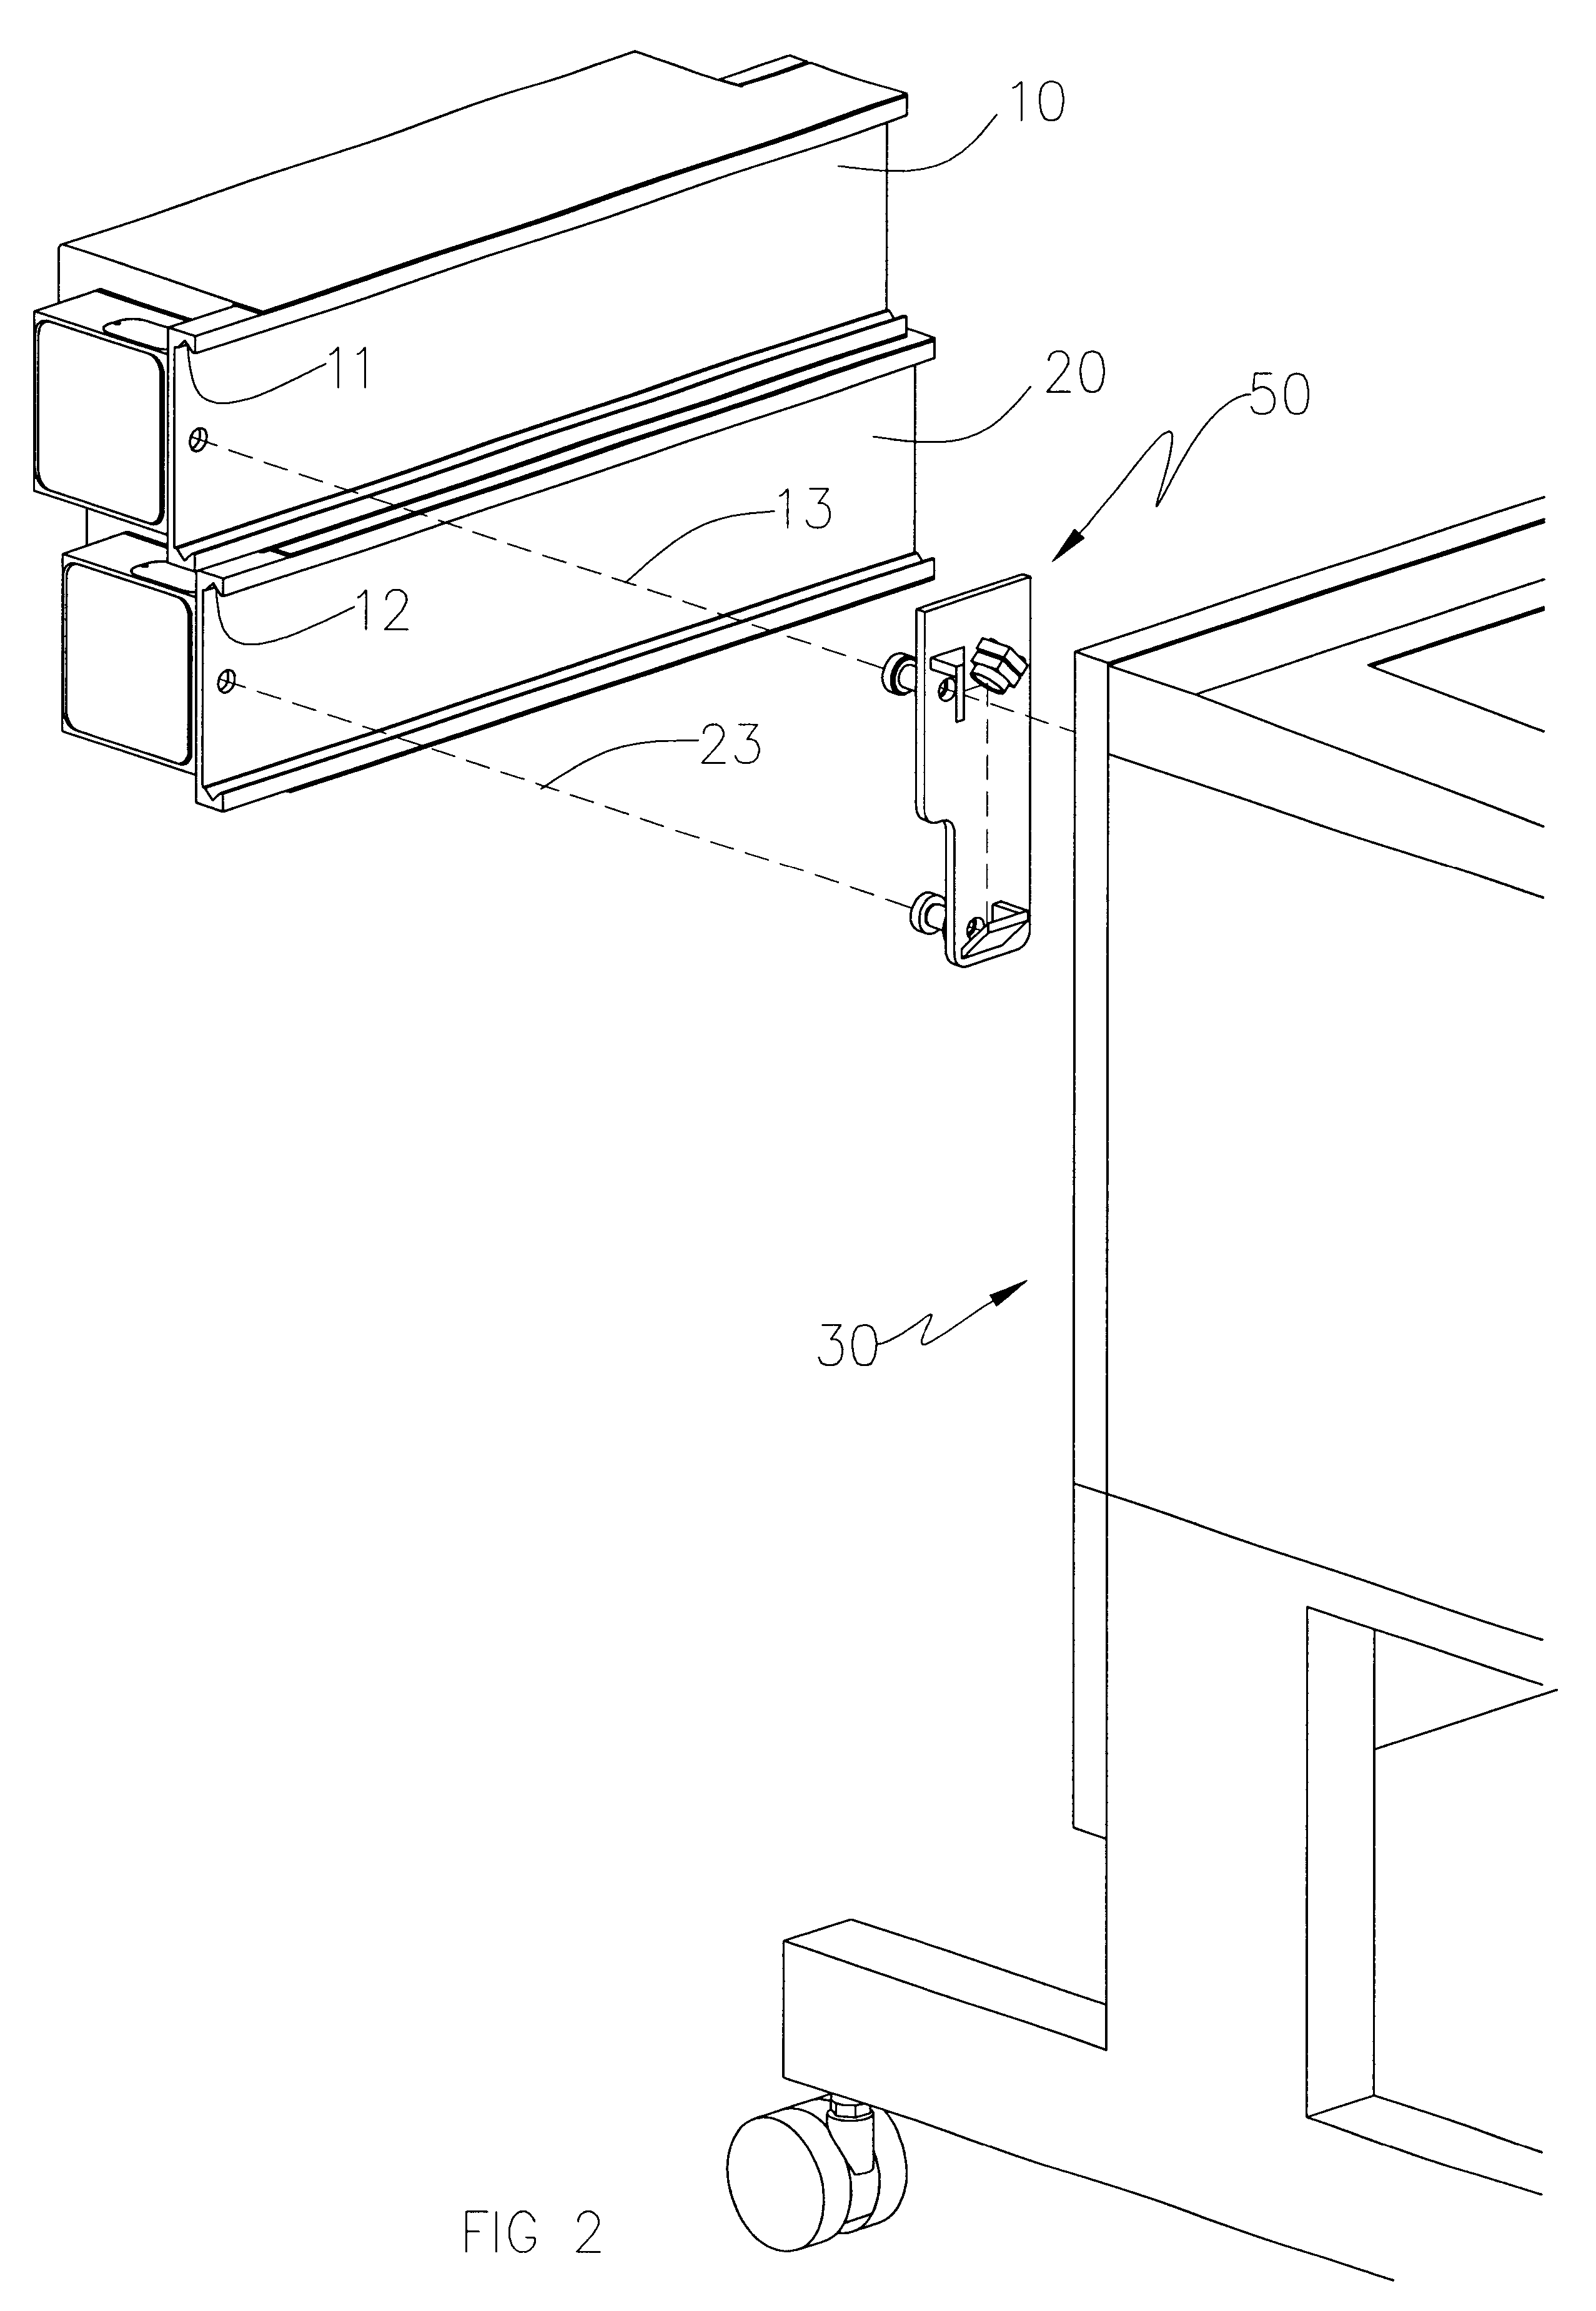 Apparatus and method for combining multiple laser beams in laser material processing systems